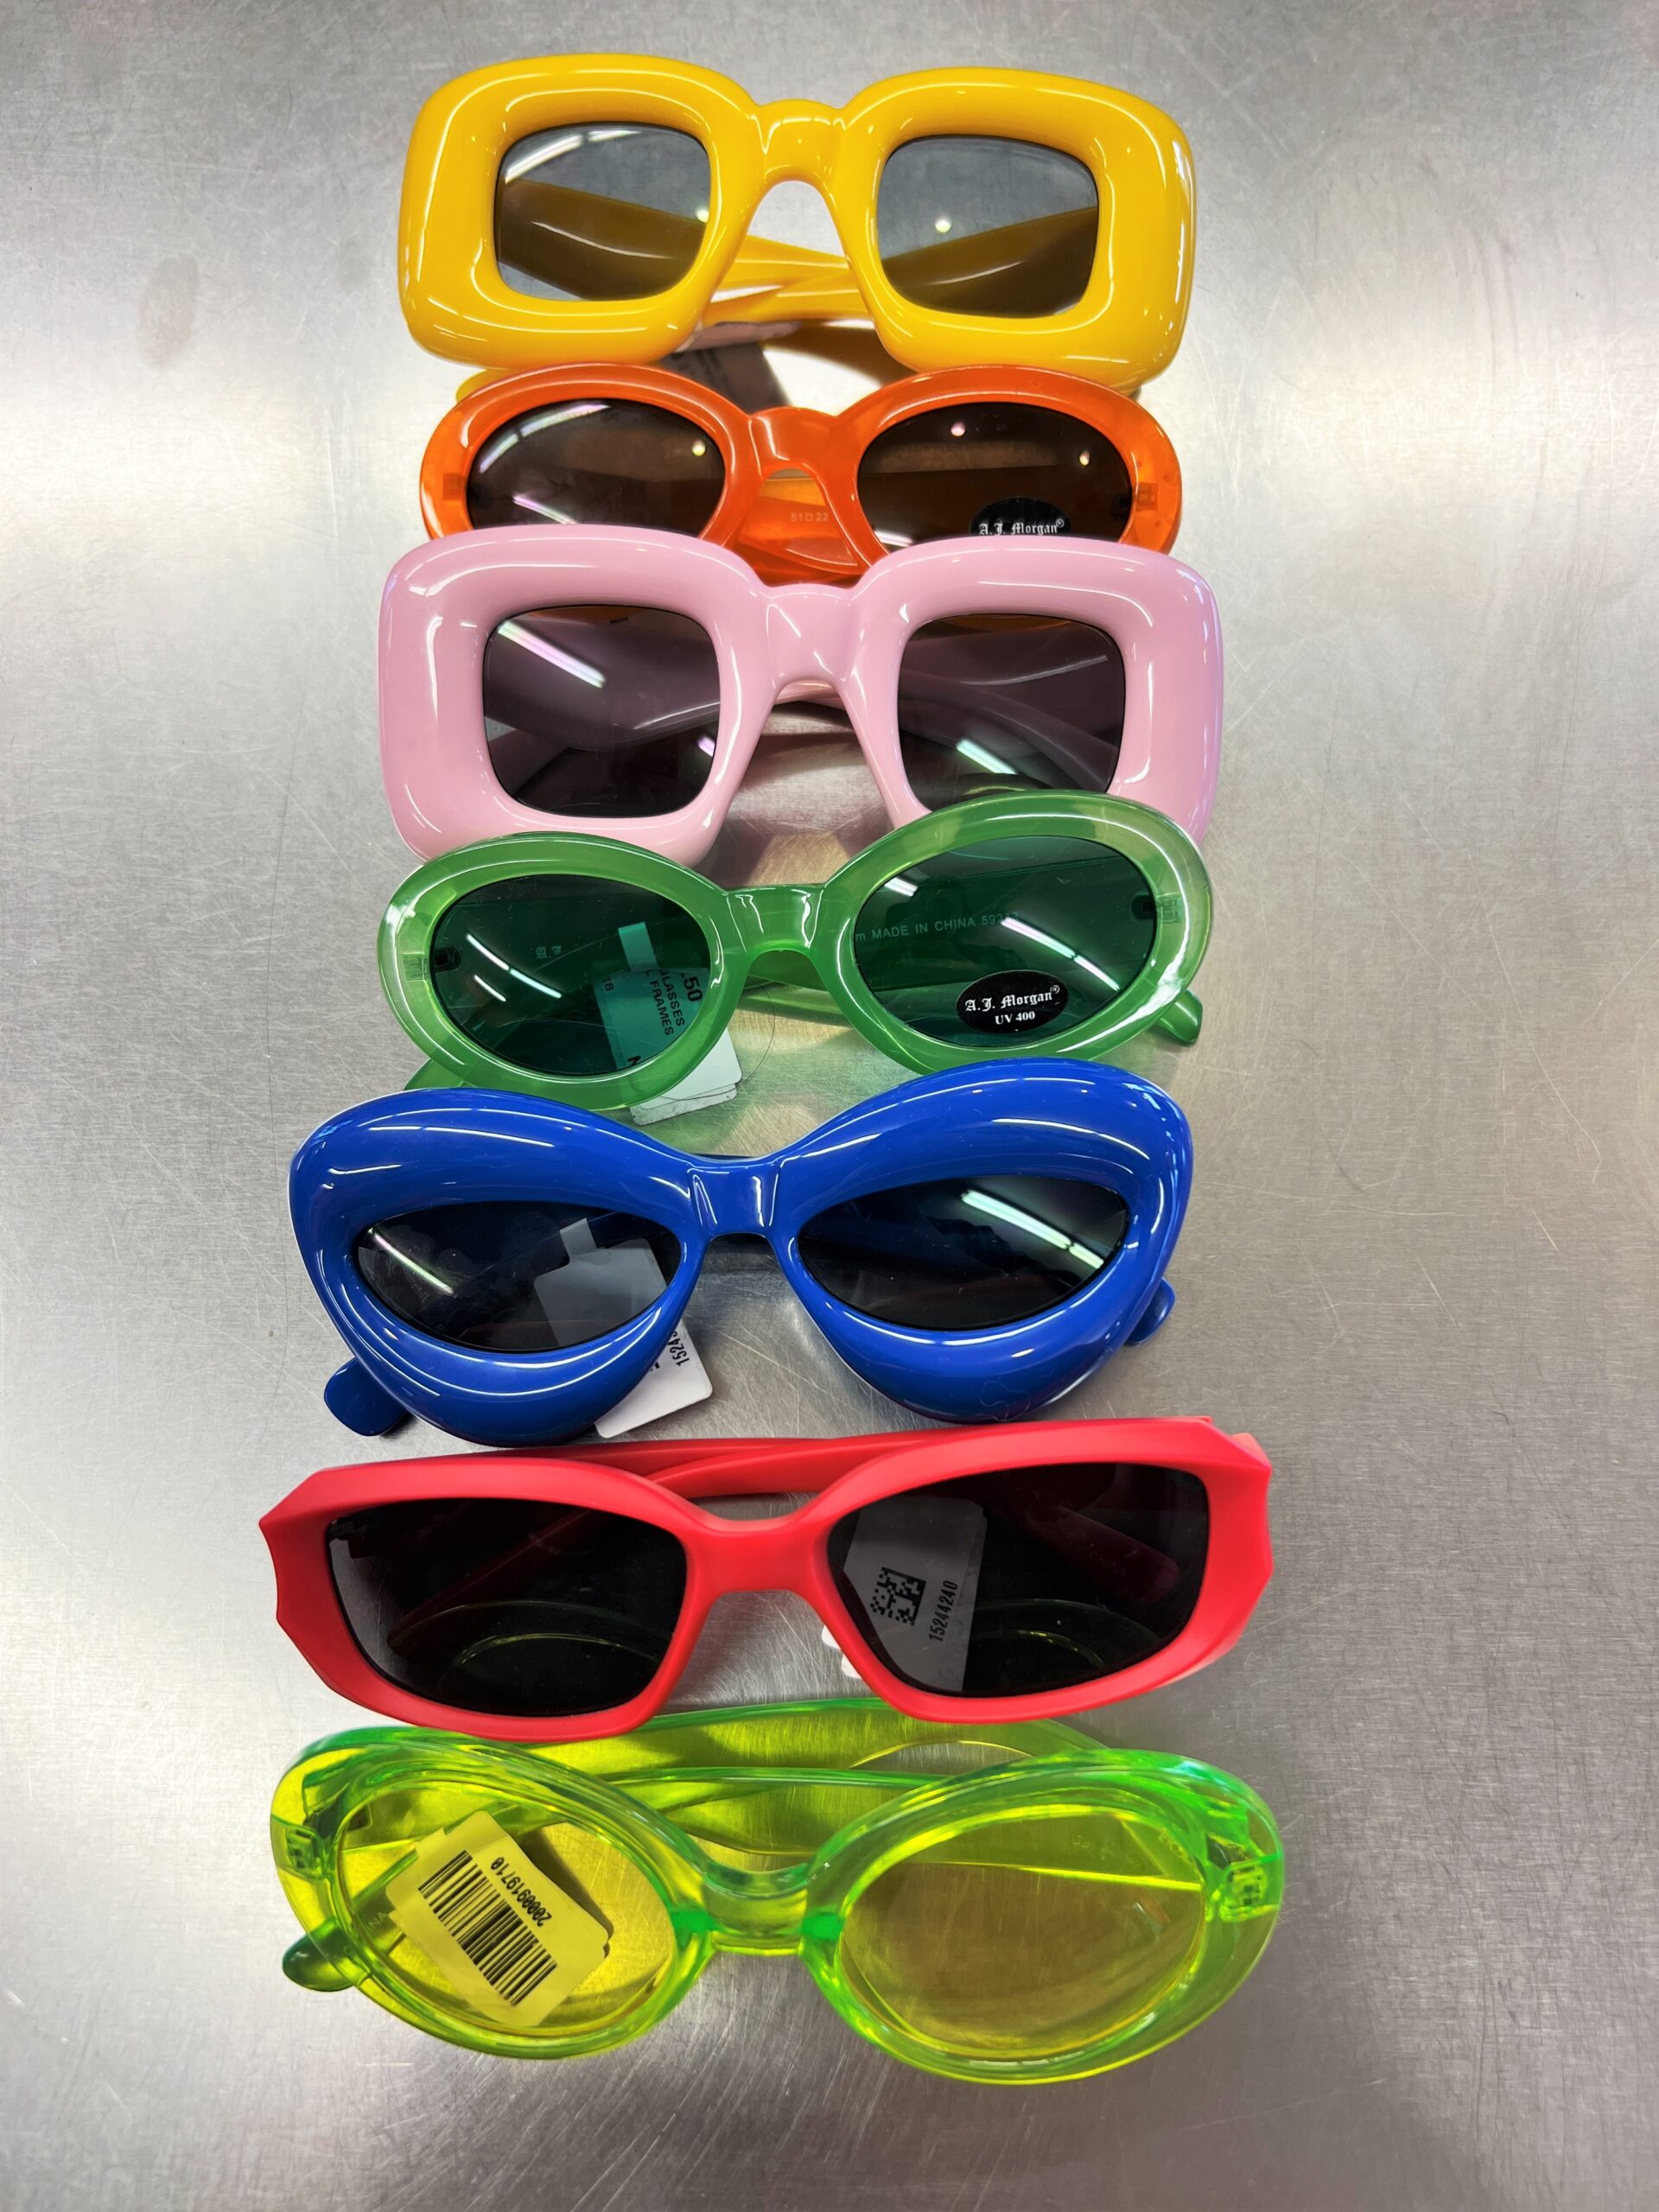 7 pairs of colorful sunglasses